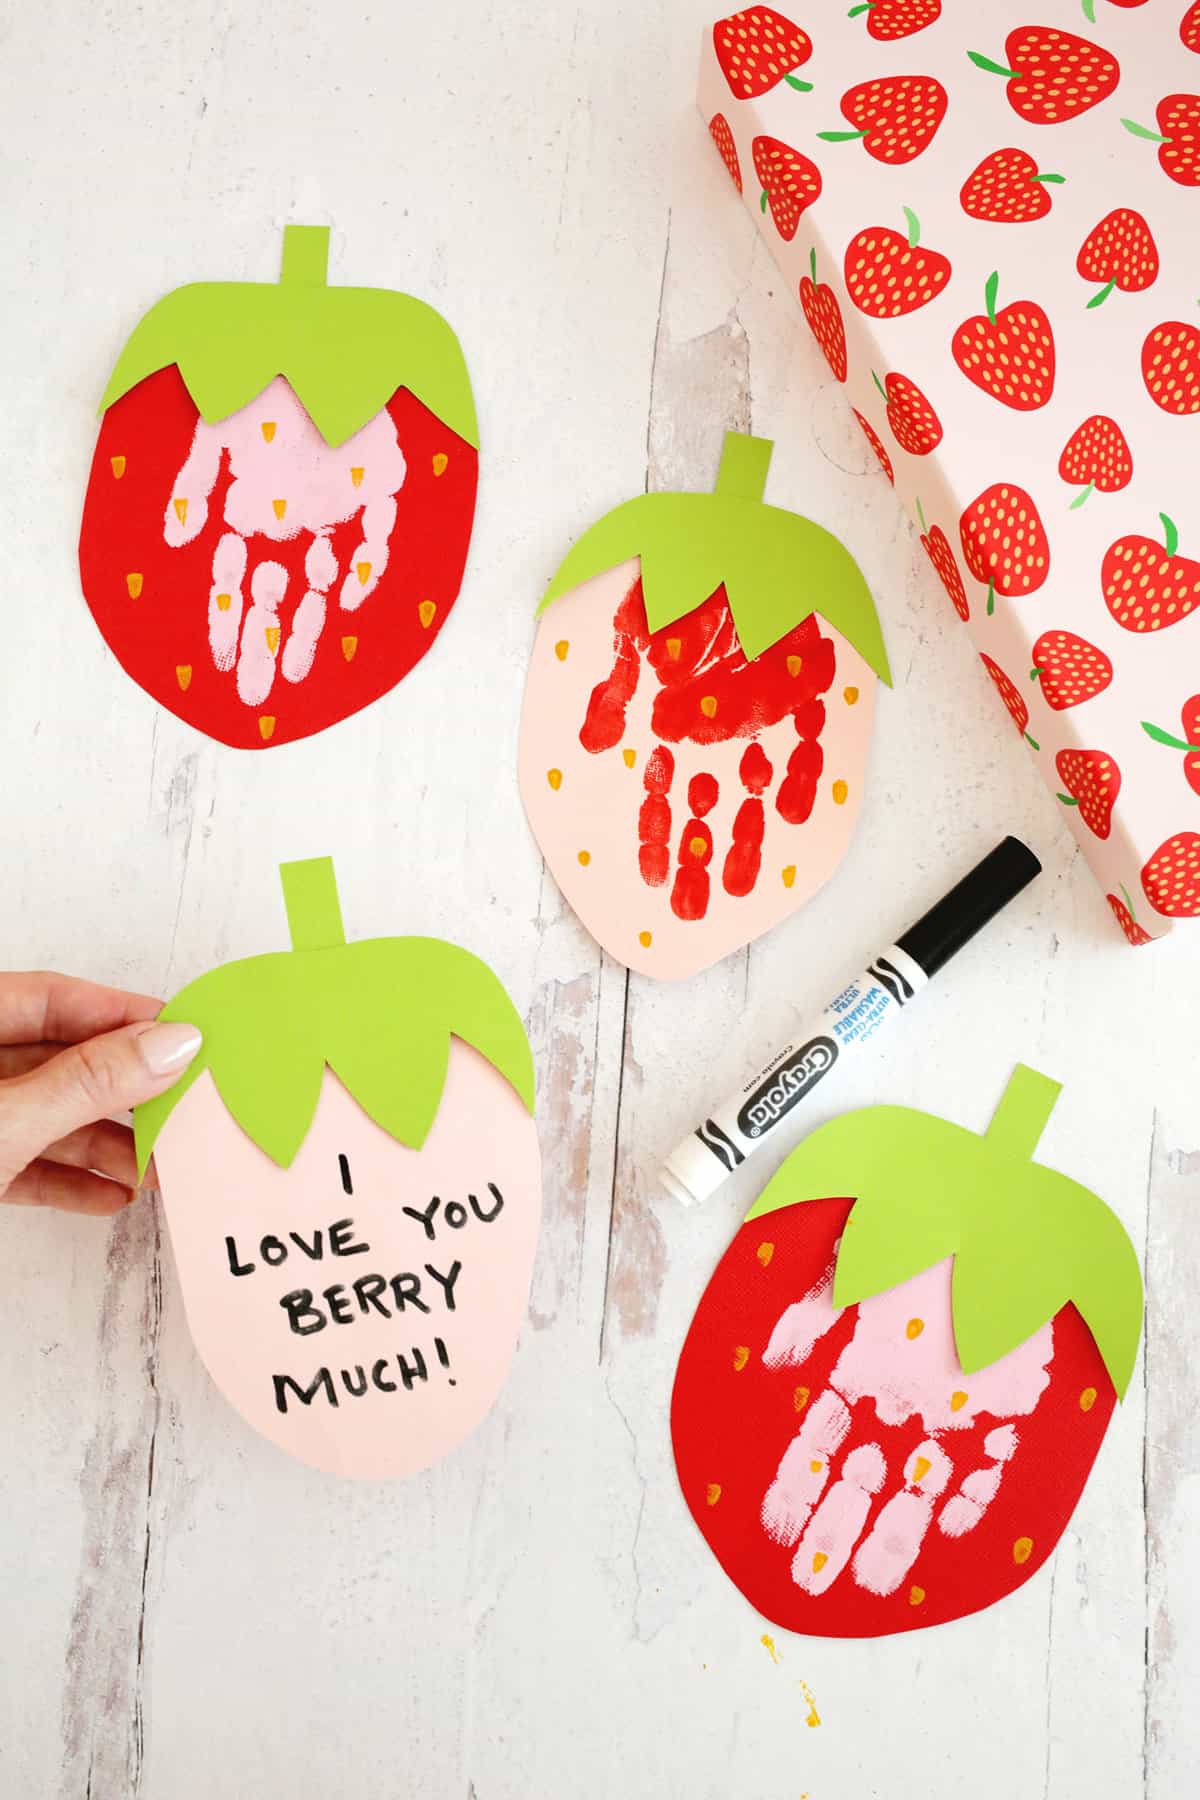 strawberry handprint cards sitting on table